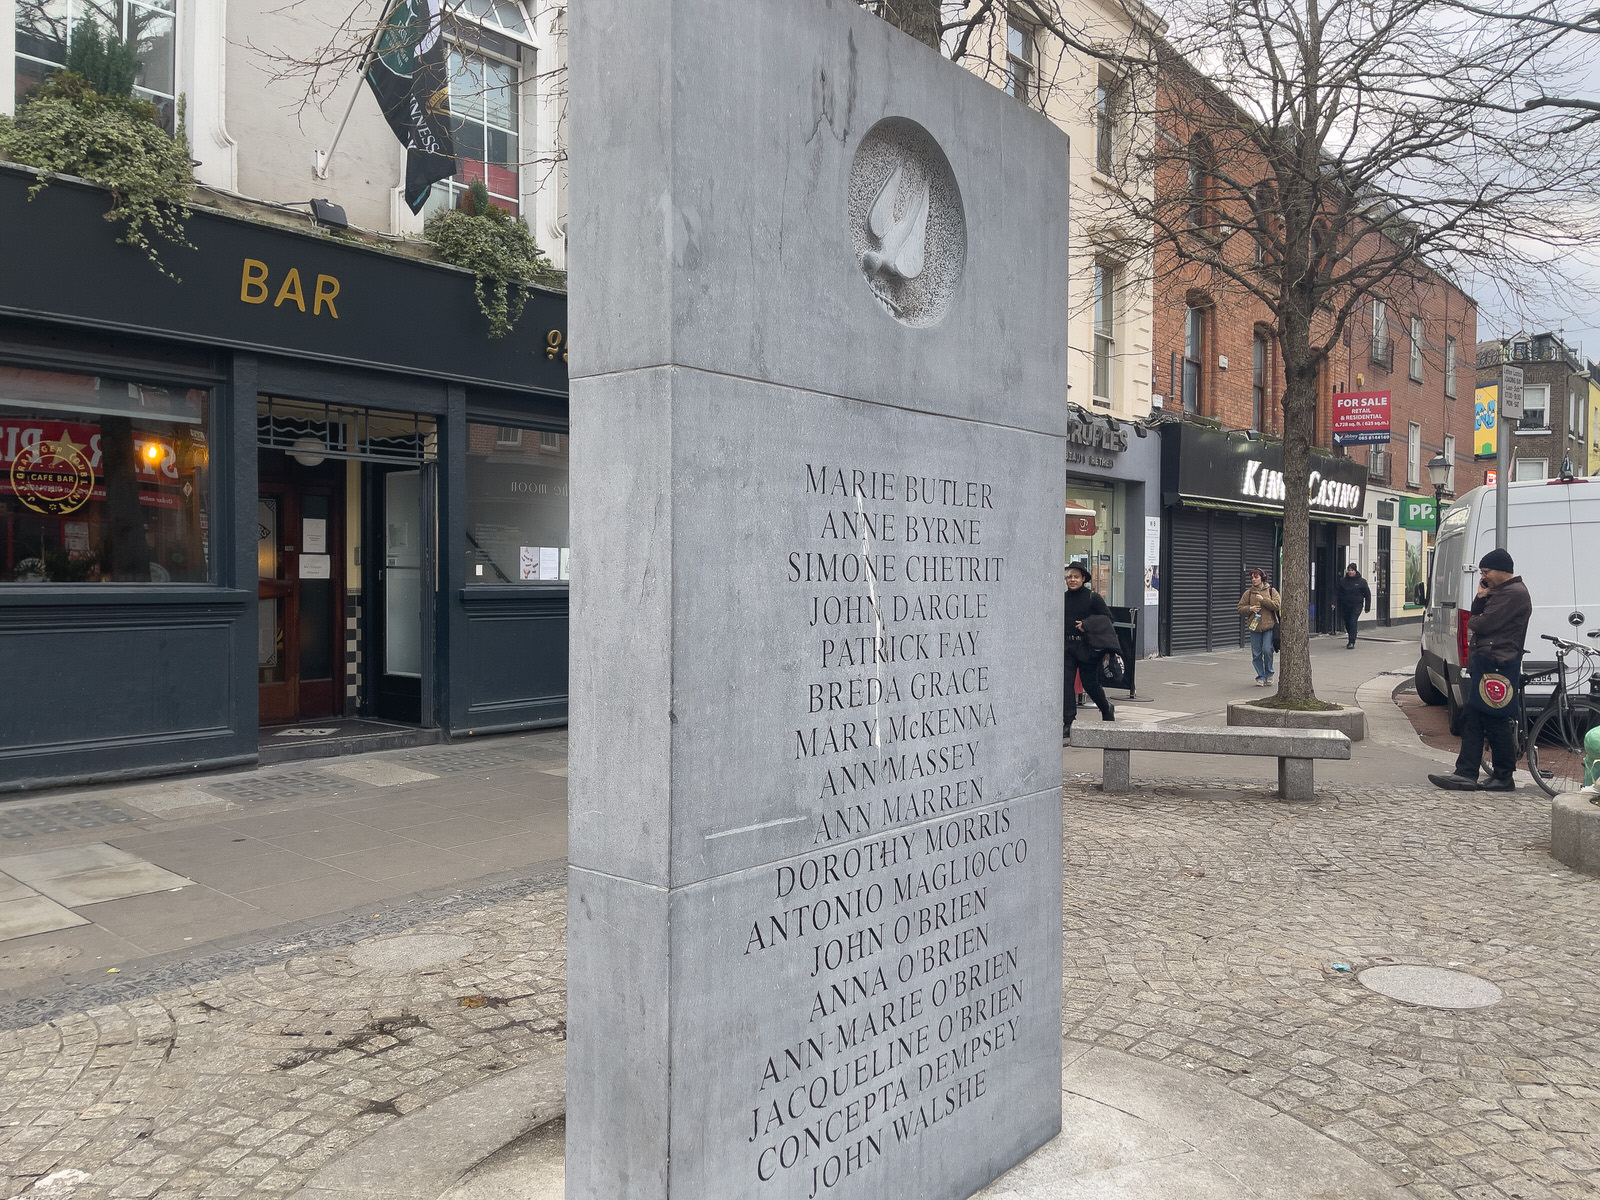 TODAY FELT THAT IT WAS APPROPRIATE TO PHOTOGRAPH THE DUBLIN AND MONAGHAN BOMBING MEMORIAL [THIS IS LOCATED ON TALBOT STREET] 004